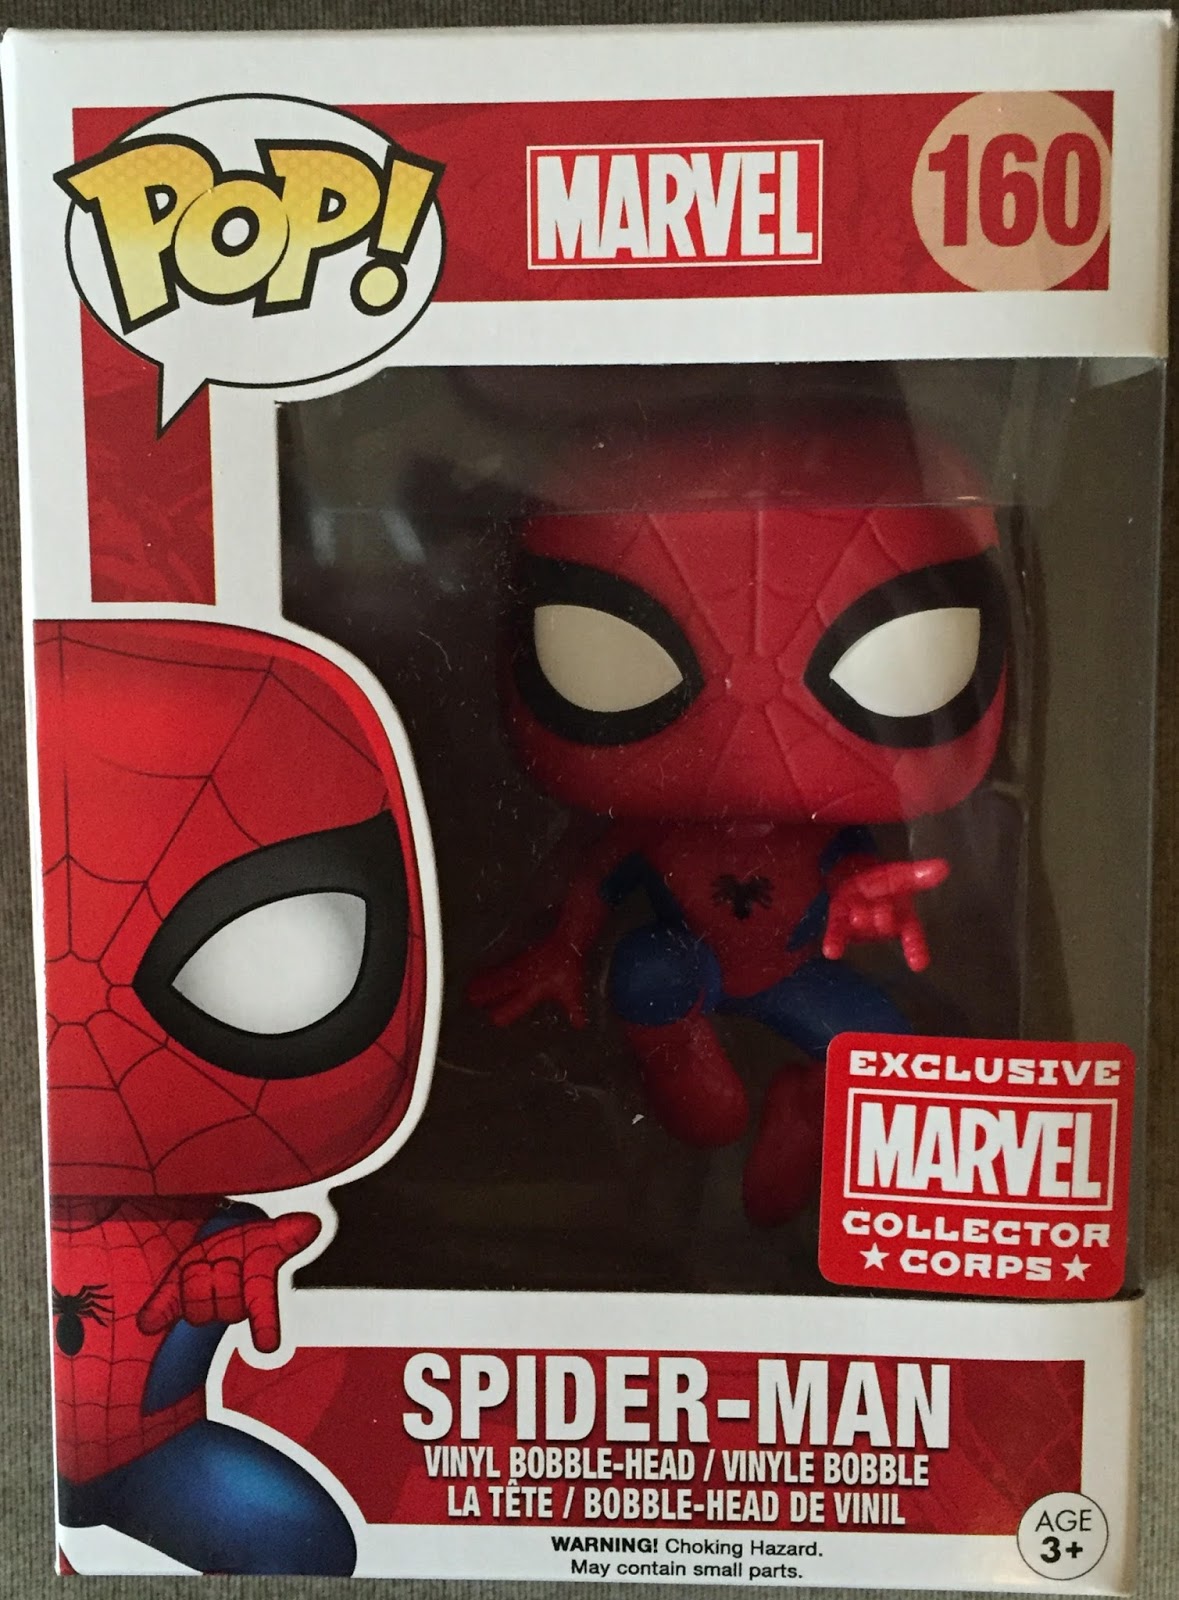 Funko Marvel Collector Corps SPIDER-MAN Subscription Box Contents Revealed